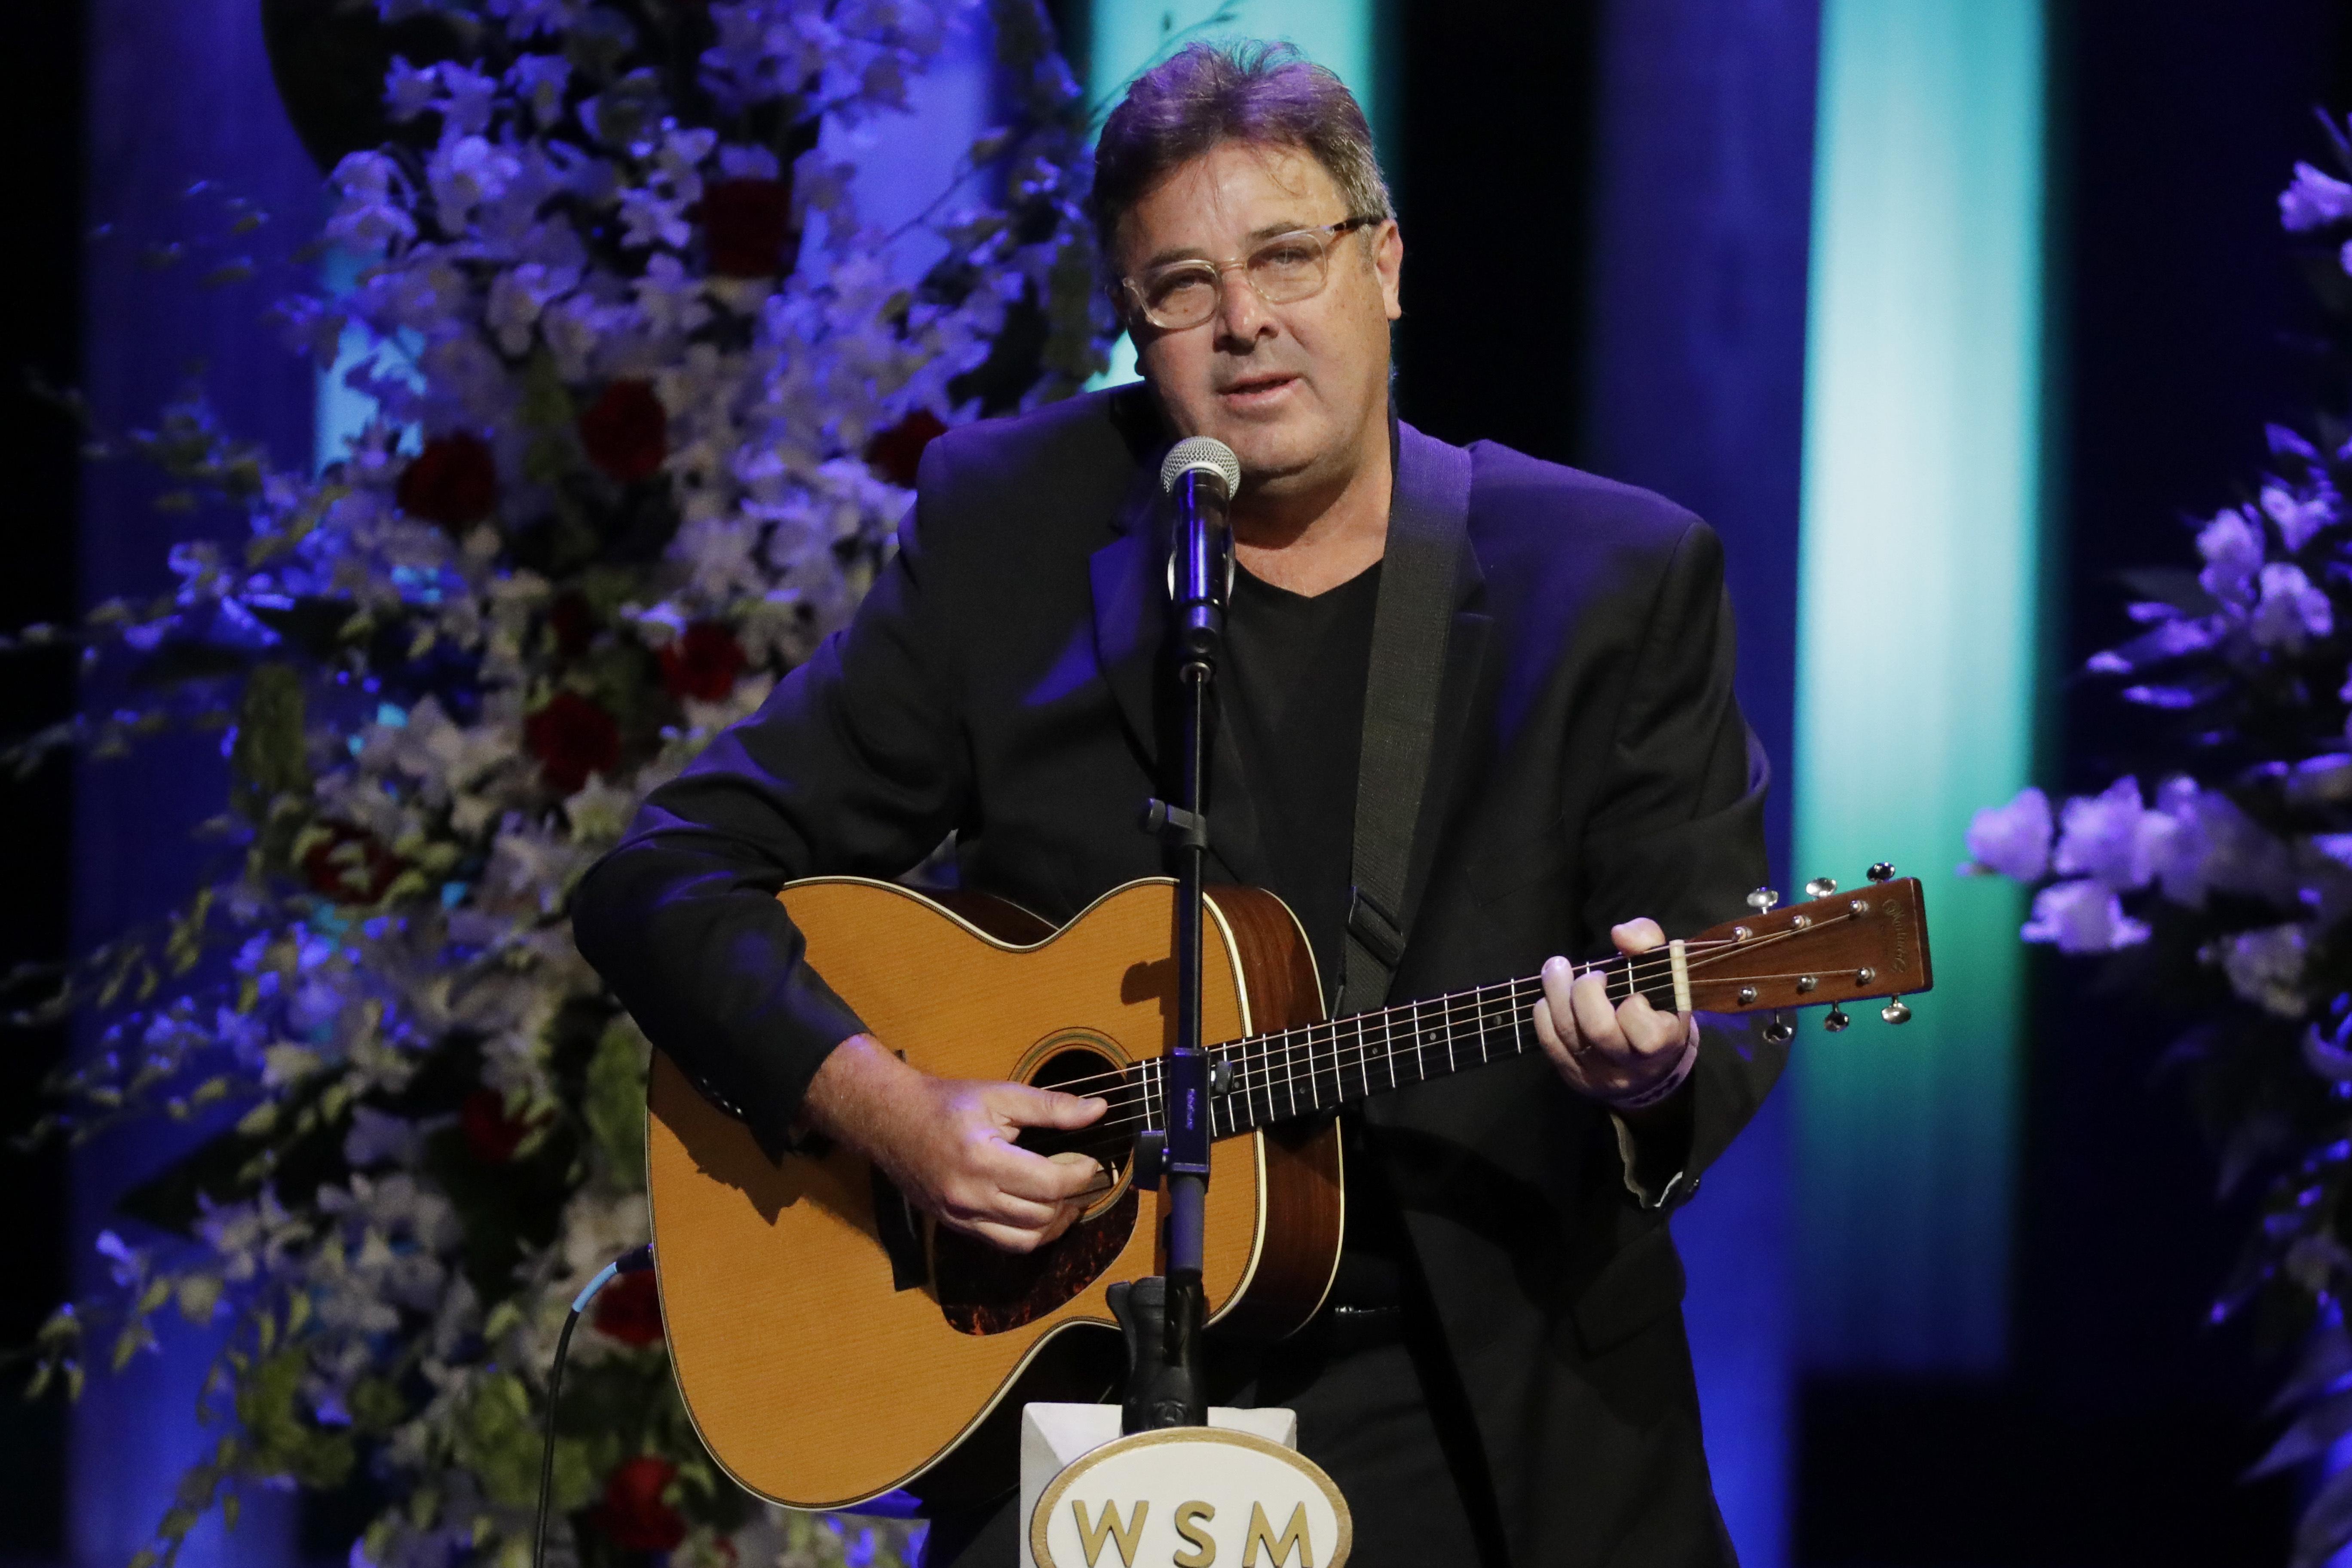 Vince Gill defends Grammys on female representation The SpokesmanReview